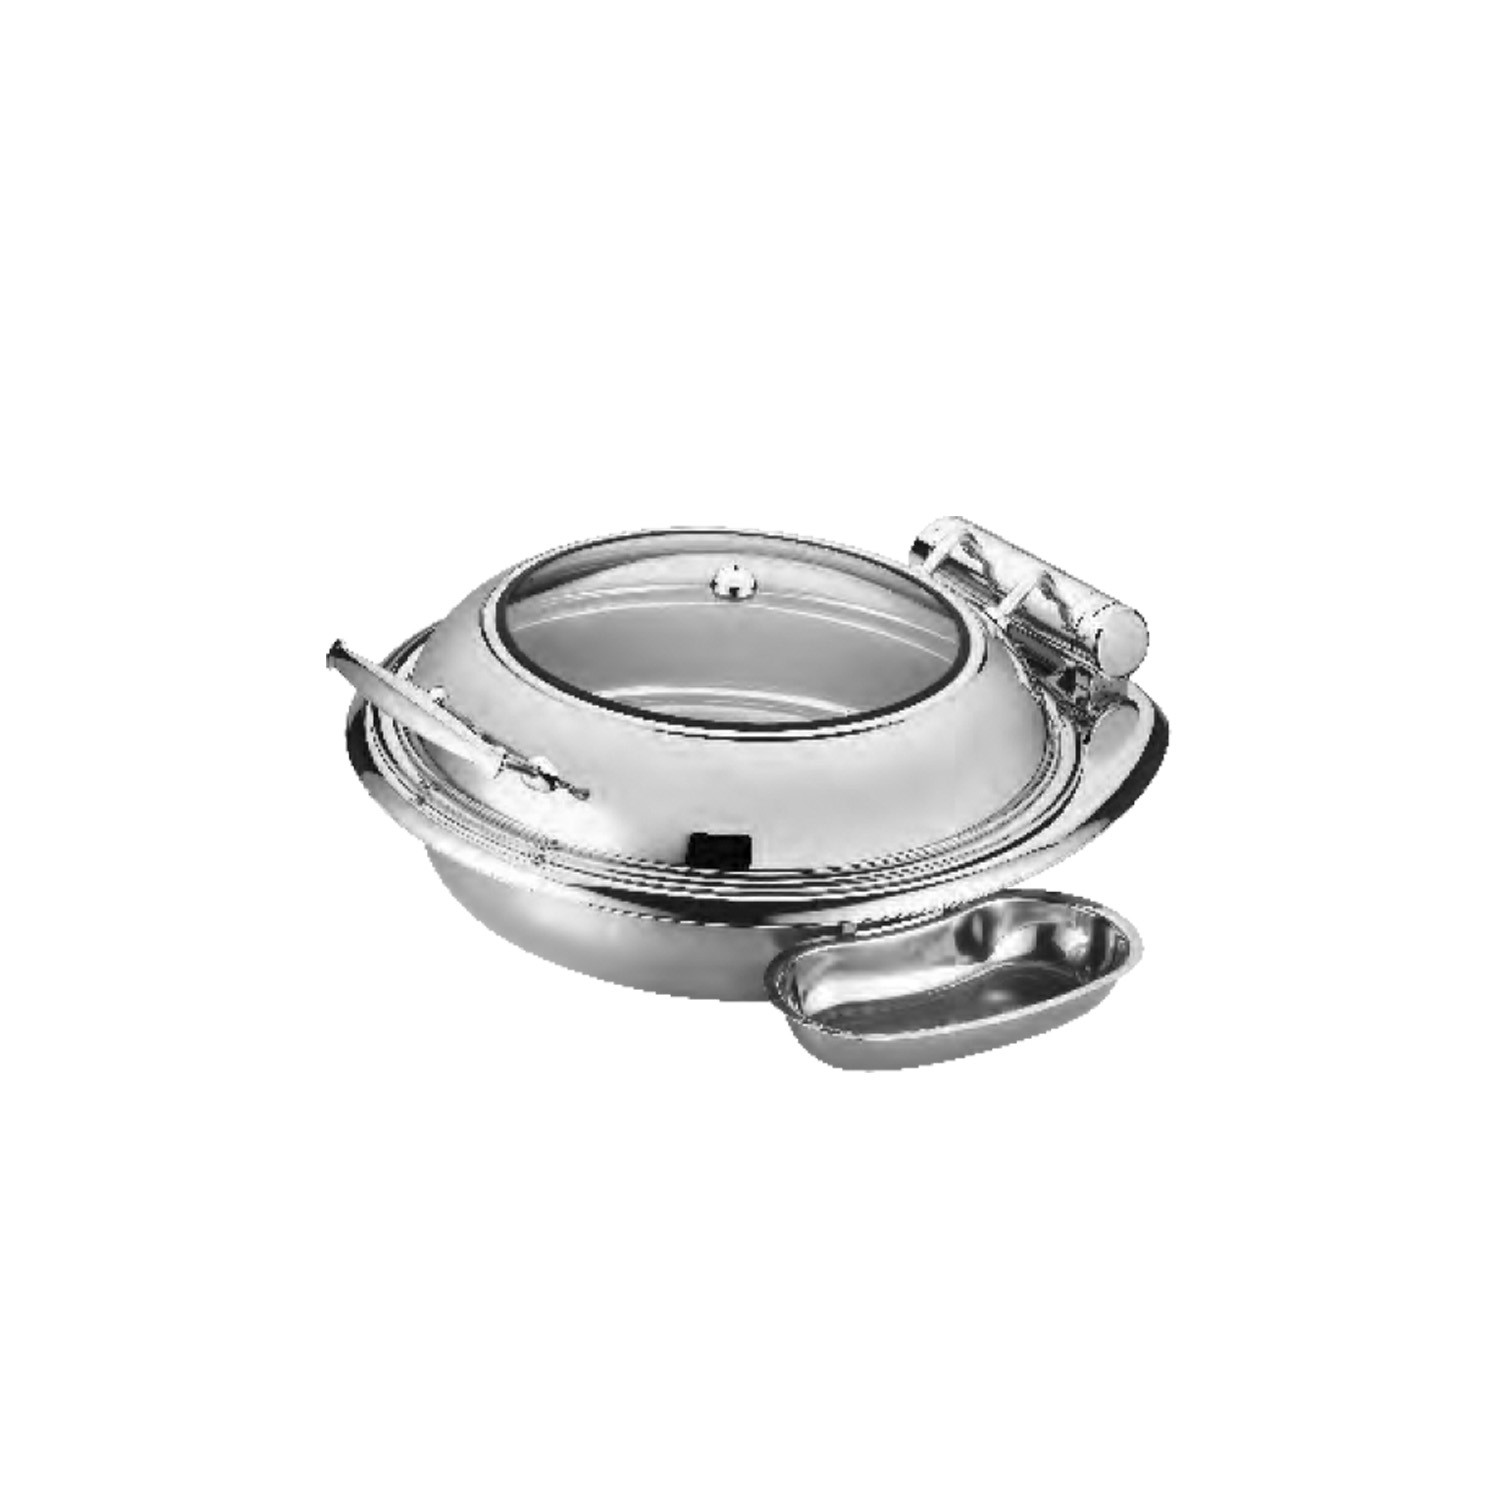 Buy Imported Round Glass Food Warmer Small at Best Price